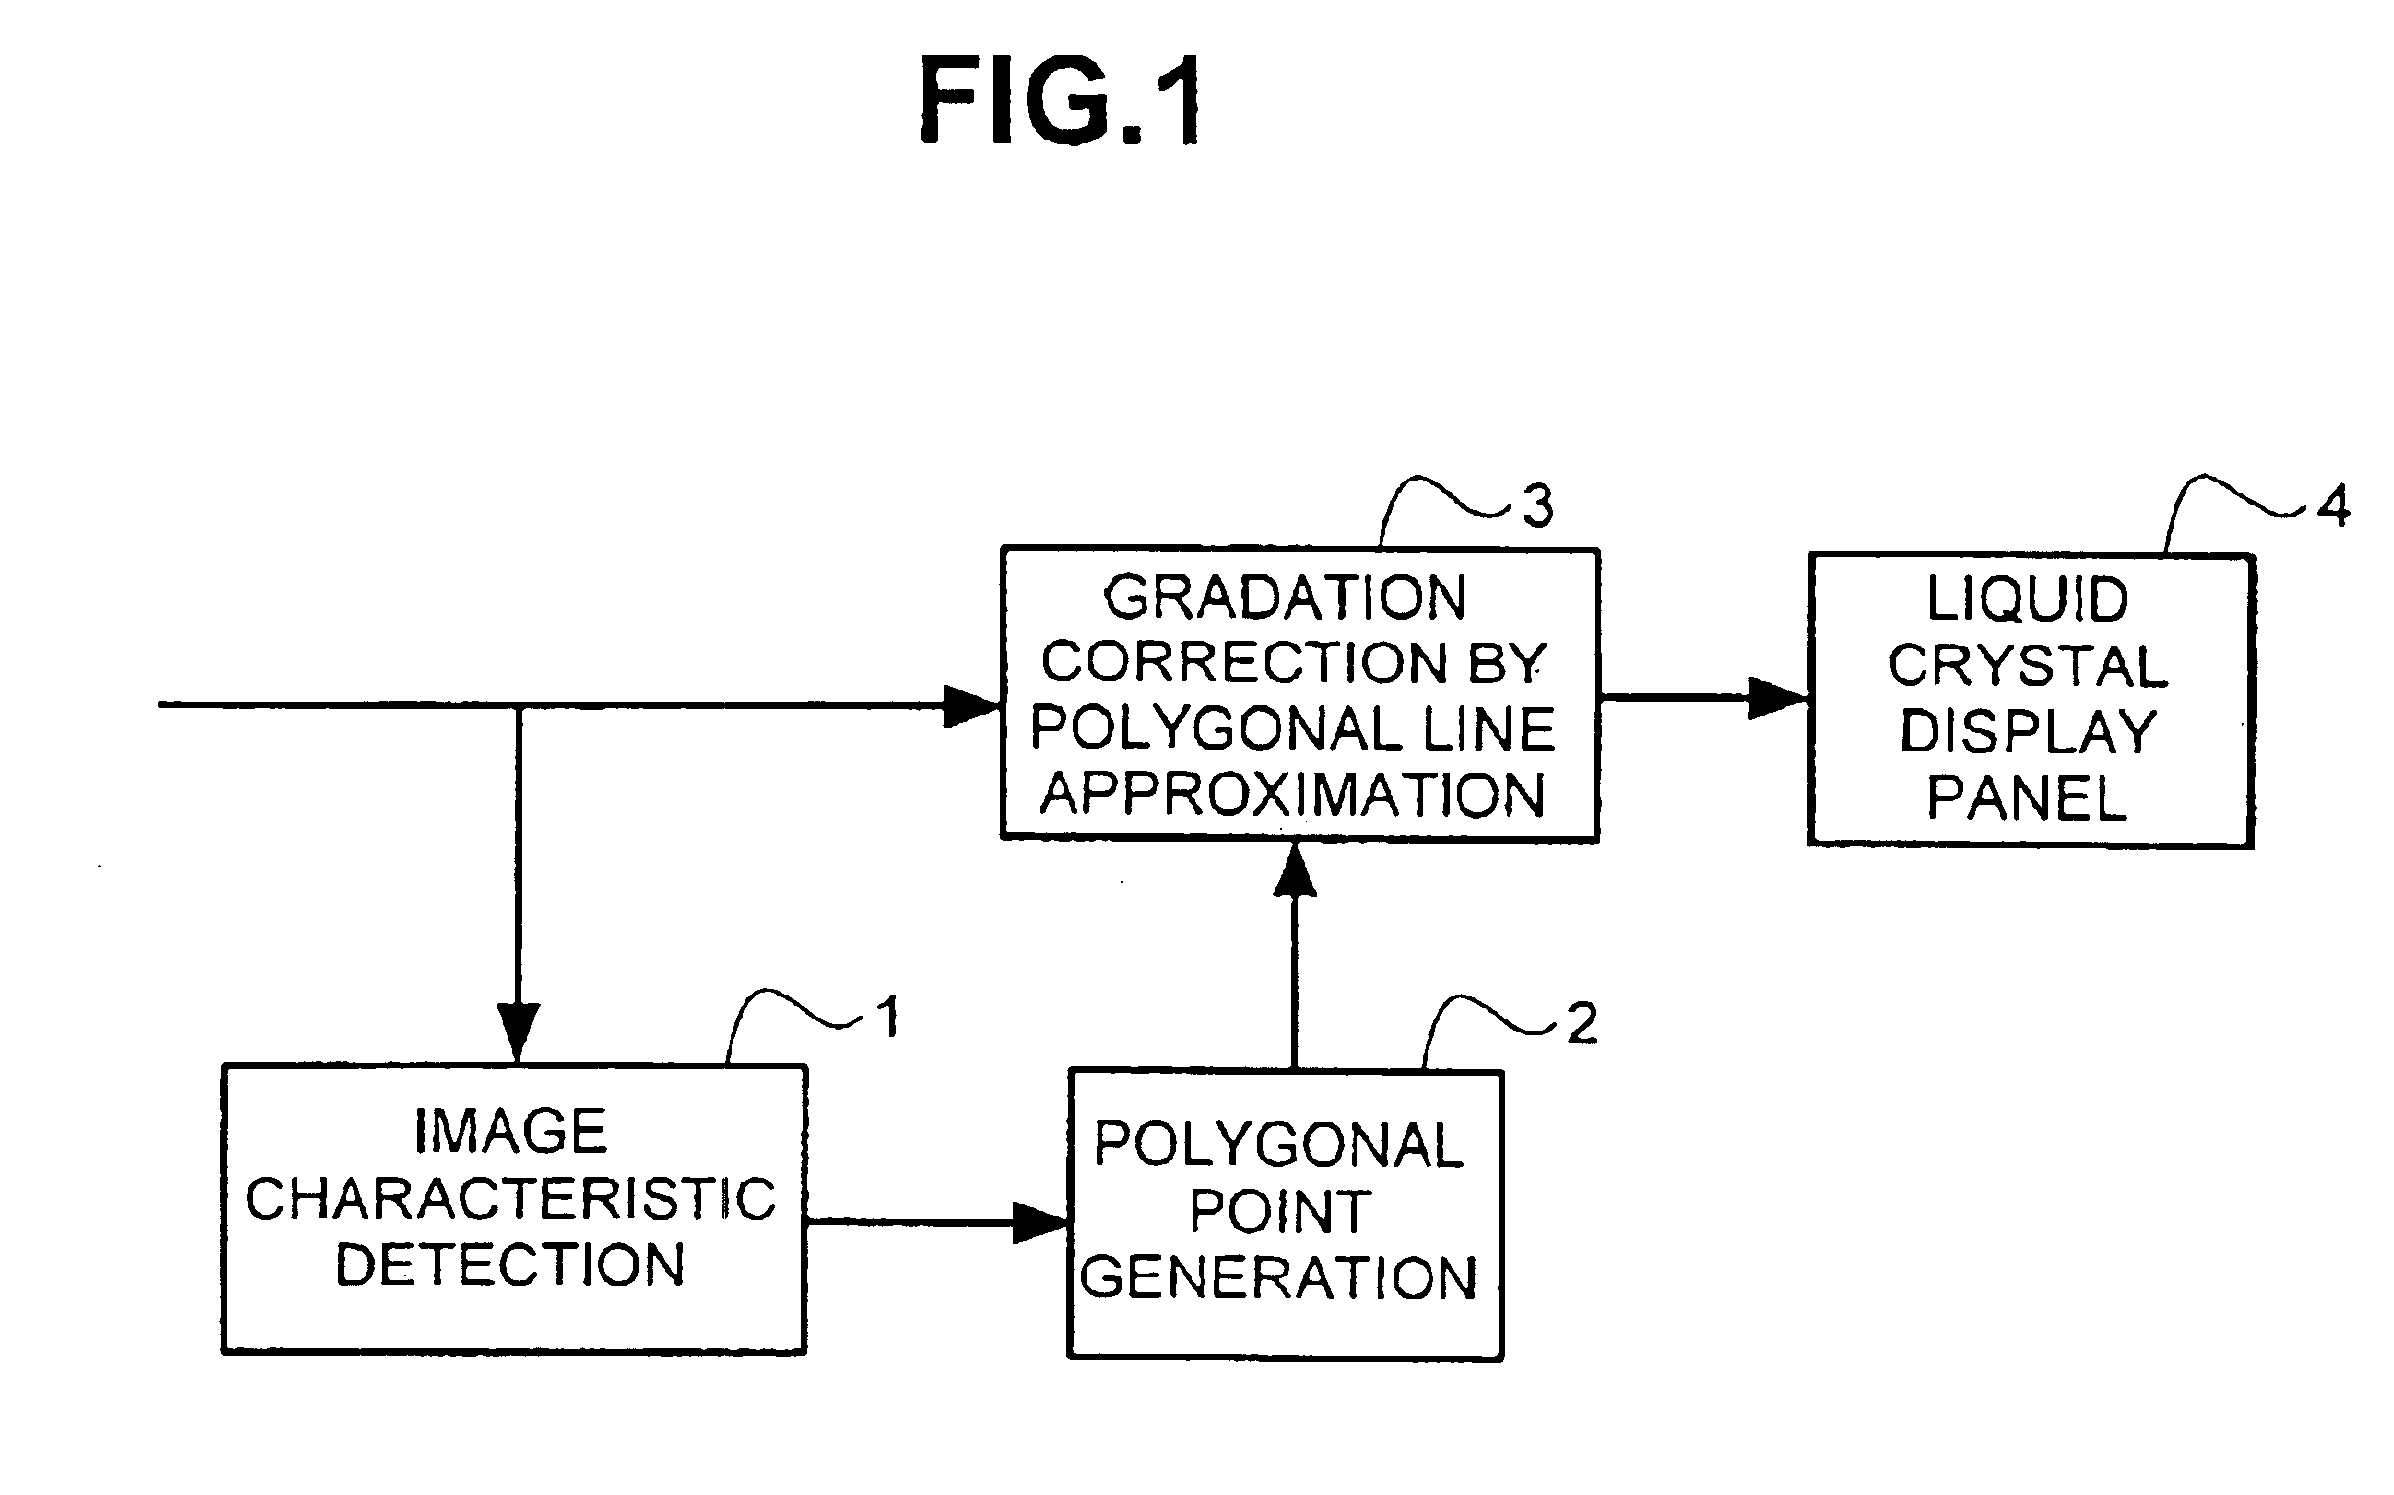 Liquid crystal display device for displaying video data